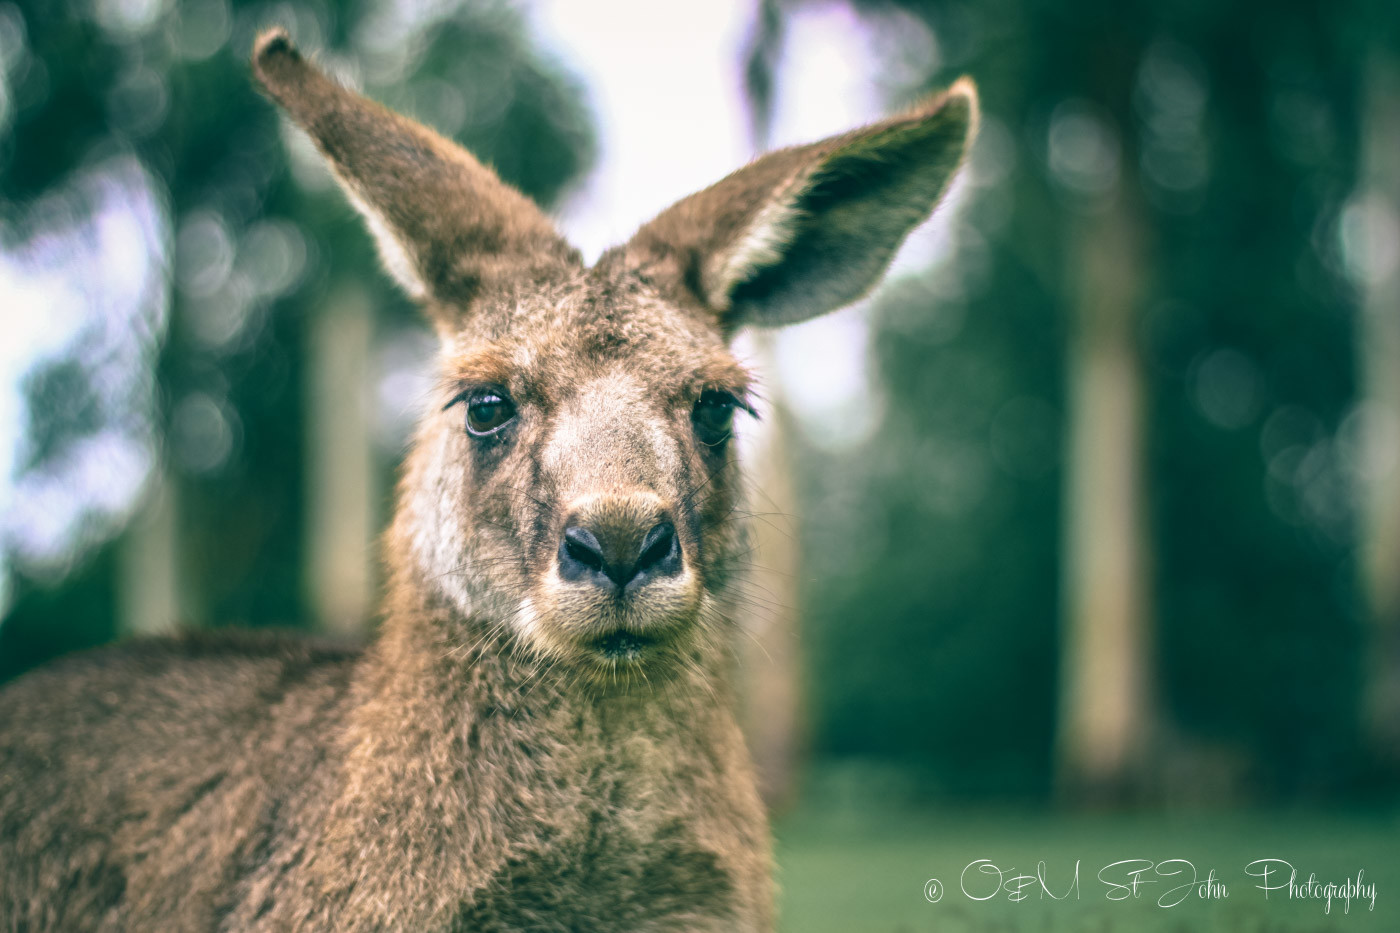 Lone Pine Sanctuary which is one of the best day trips from Brisbane Queensland Australia